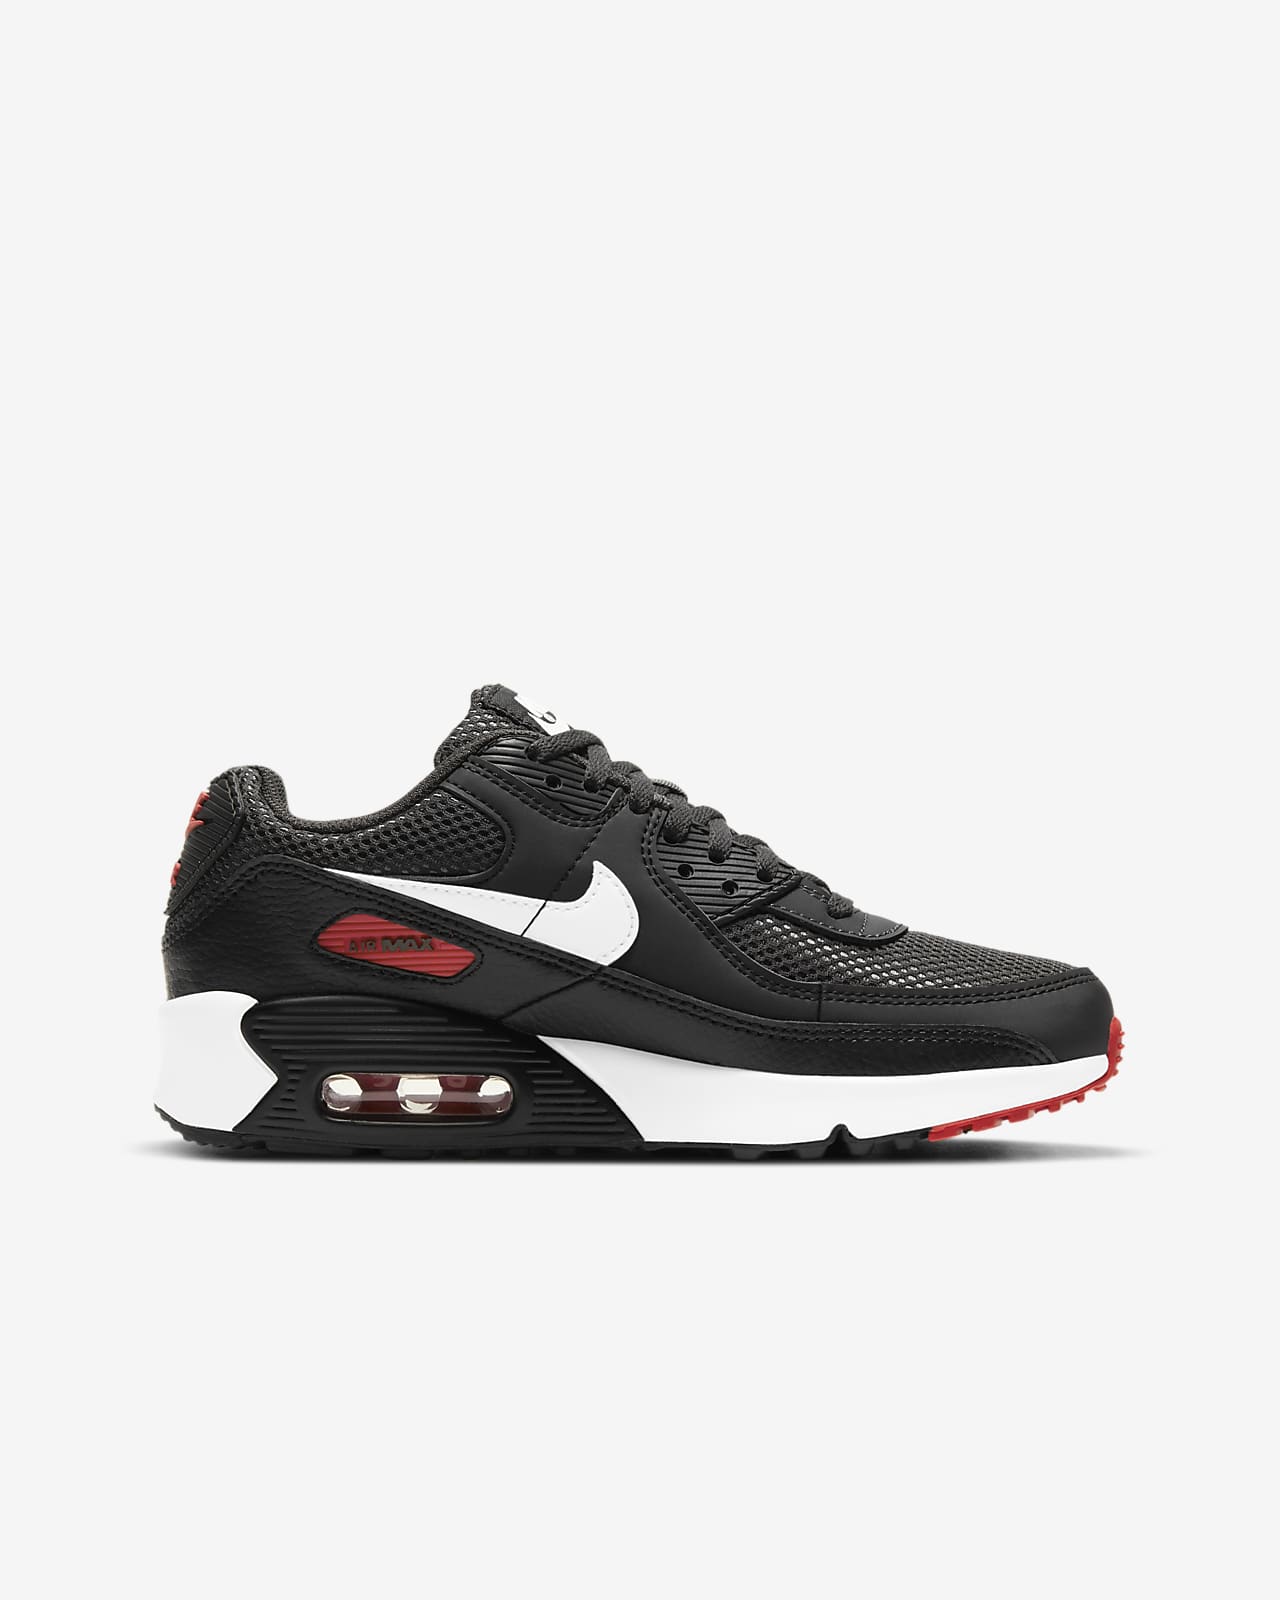 nike air max 90 youth size 7